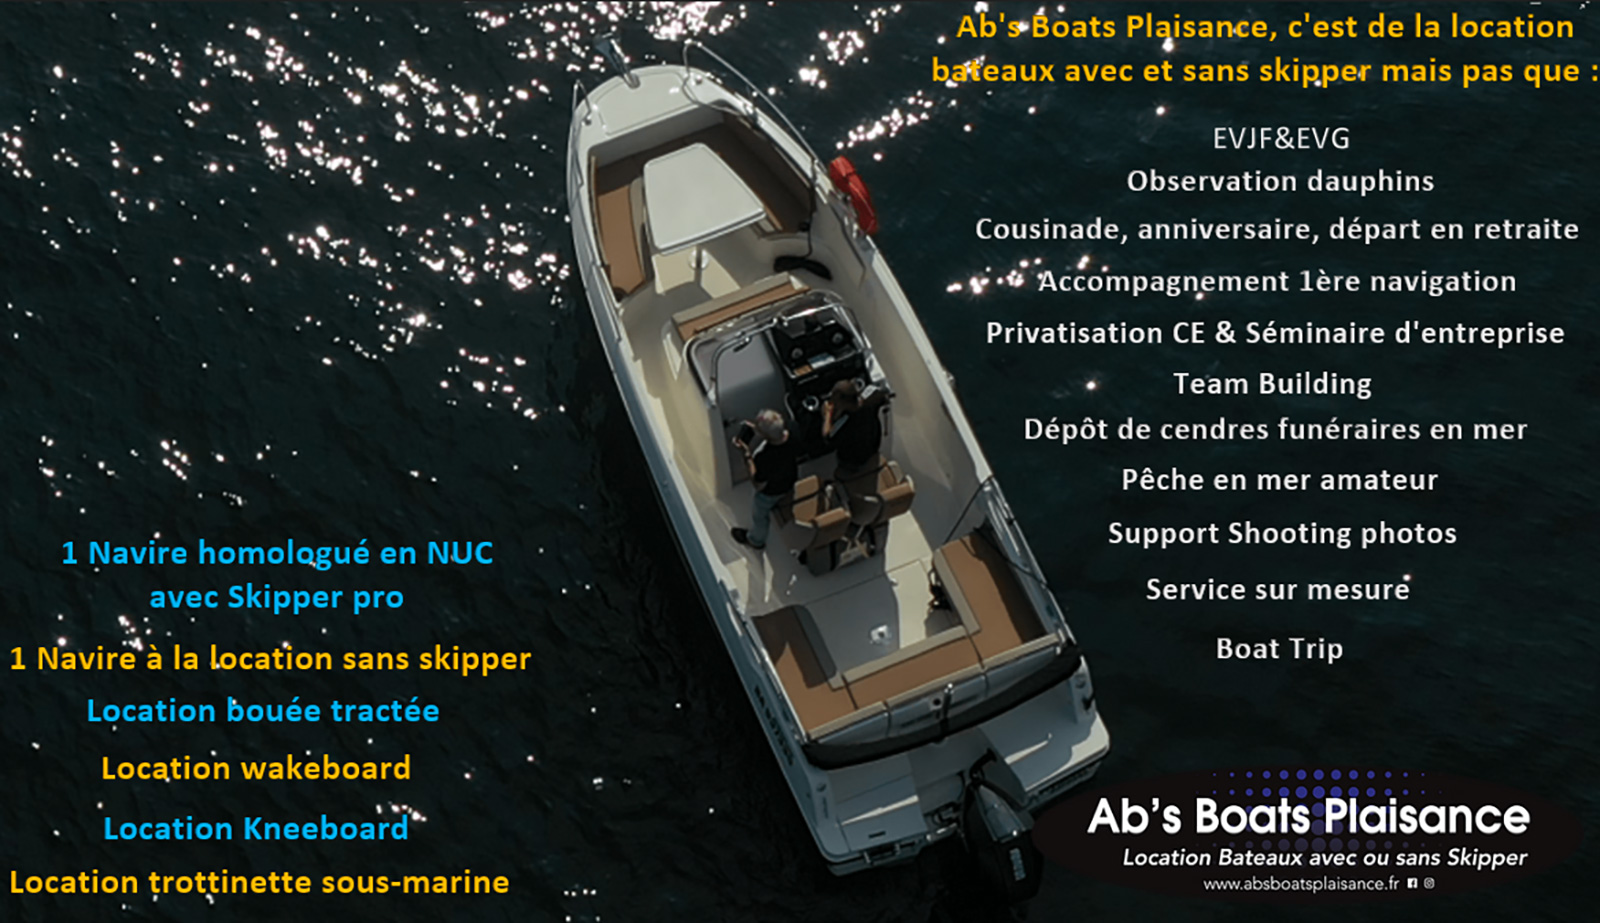 ABS BOATS PLAISANCE